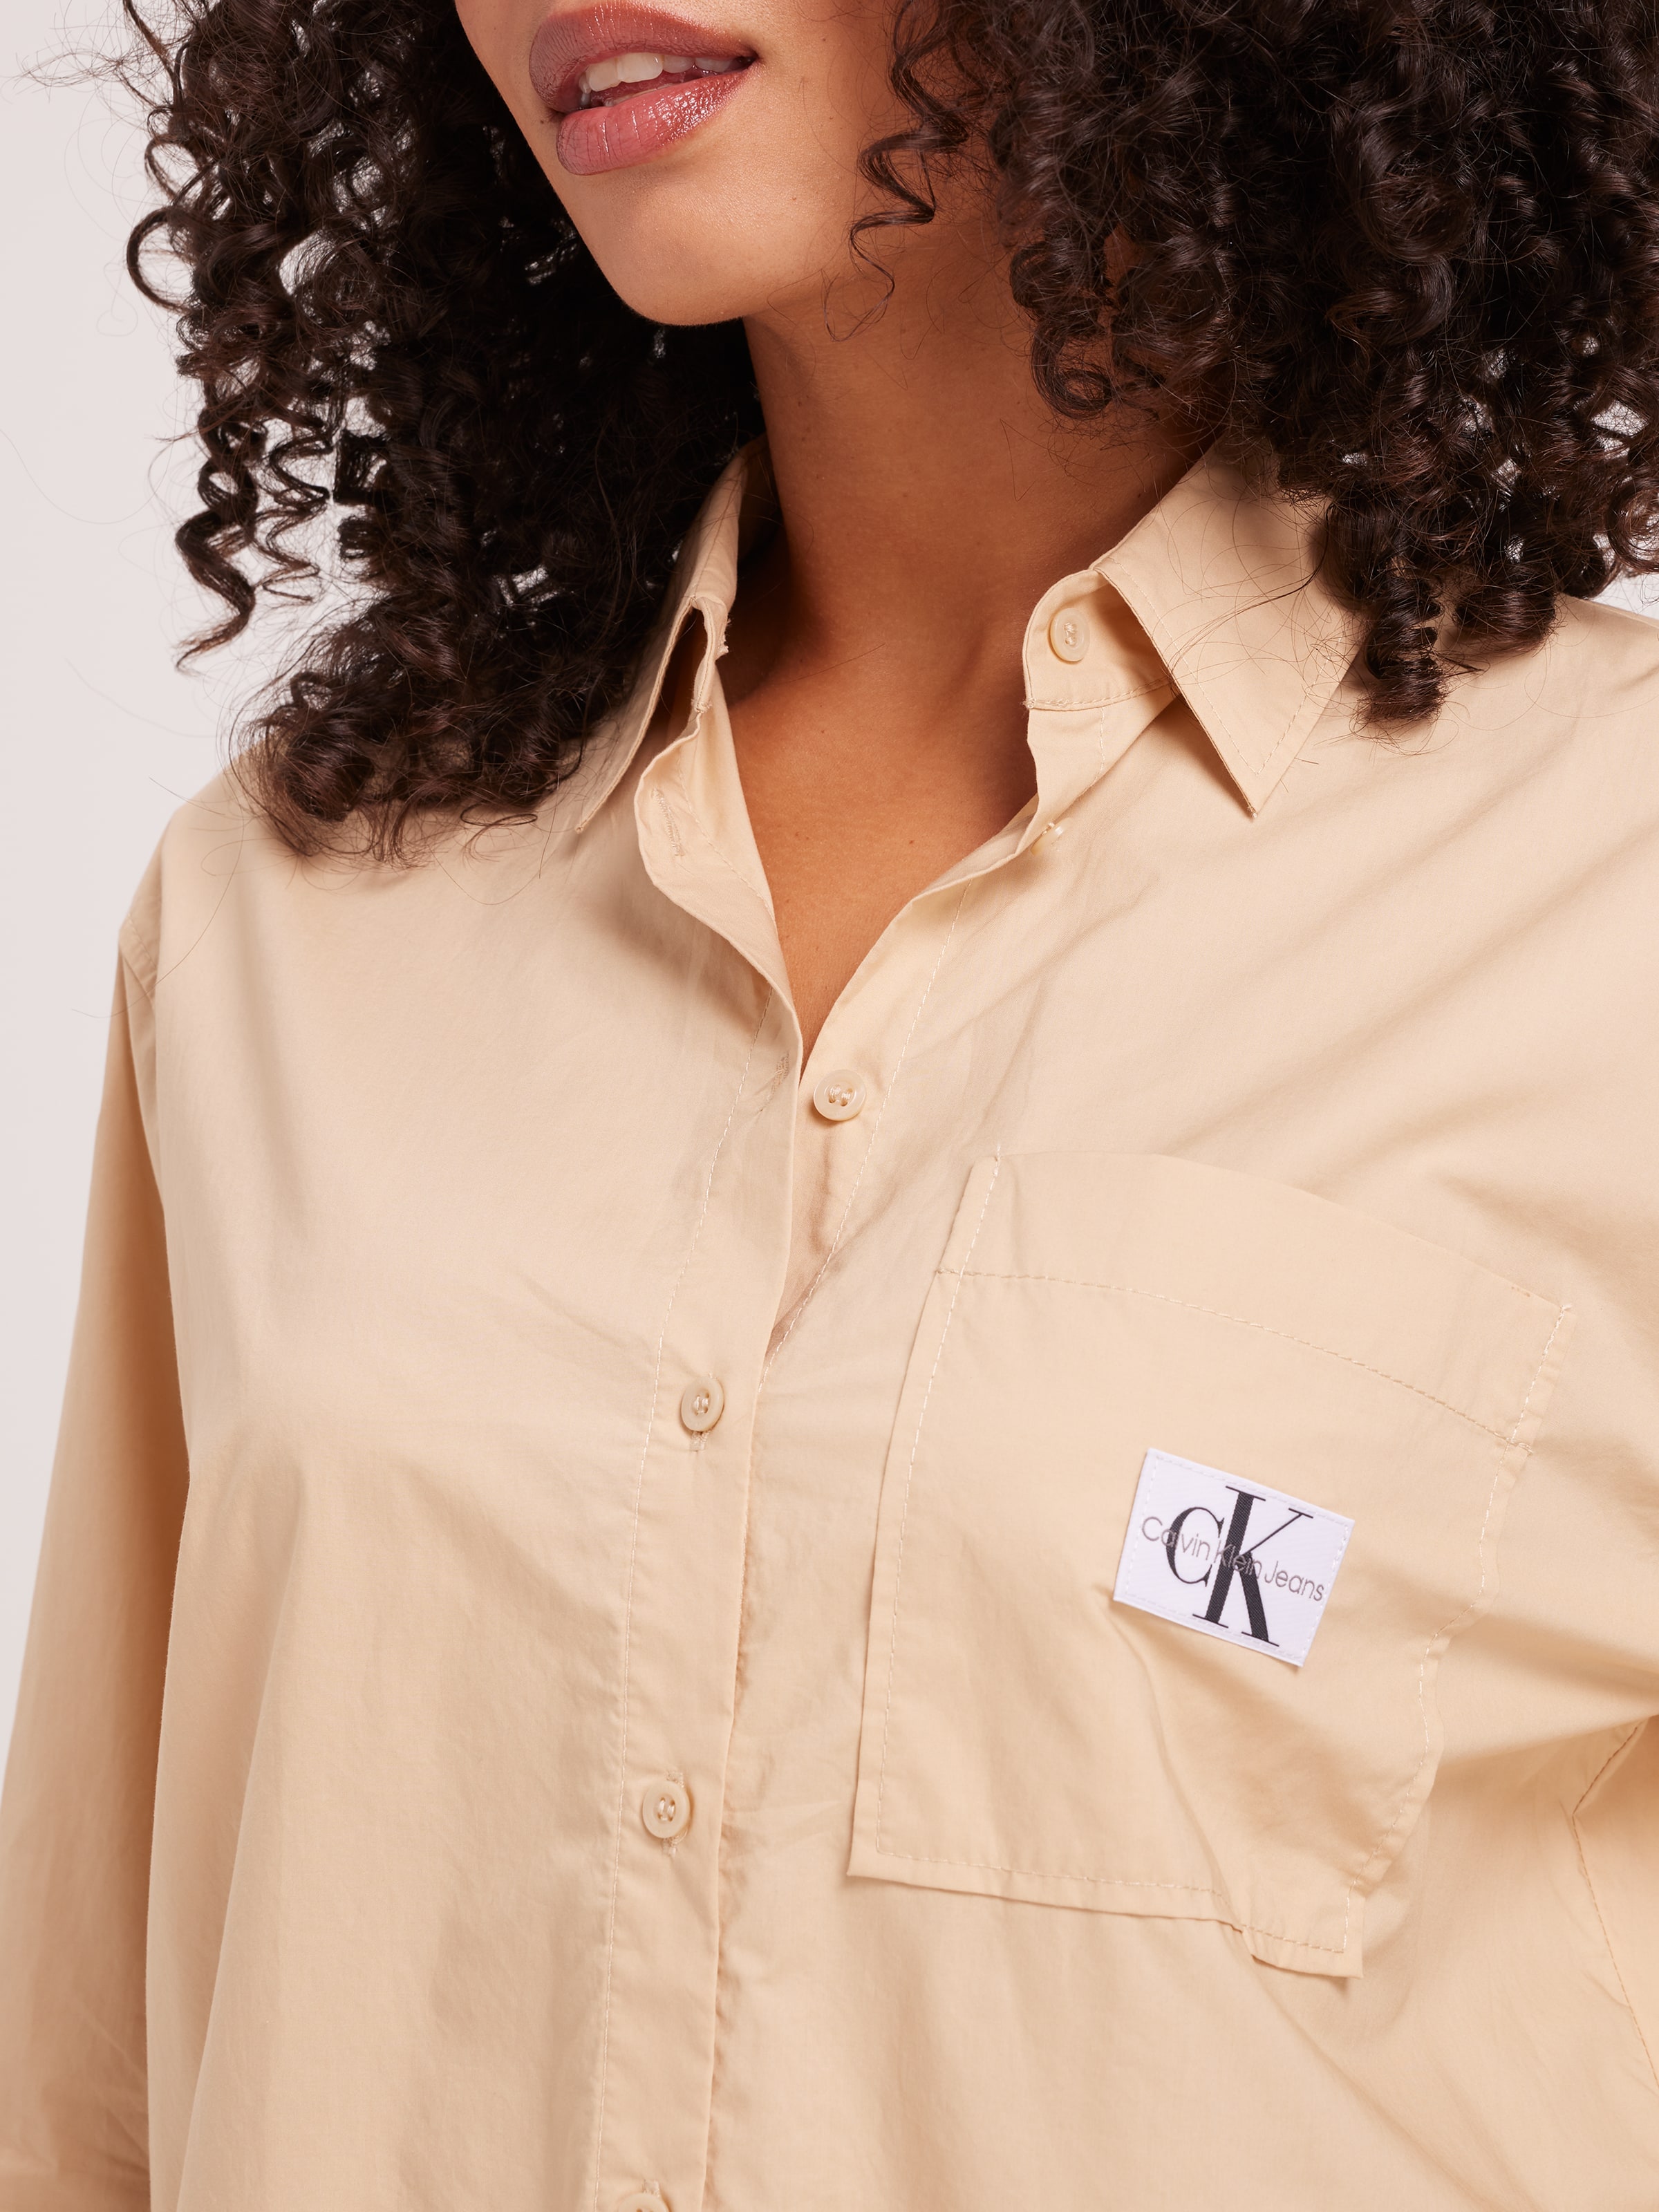 Ck Label Relaxed Shirt In Warm Sand